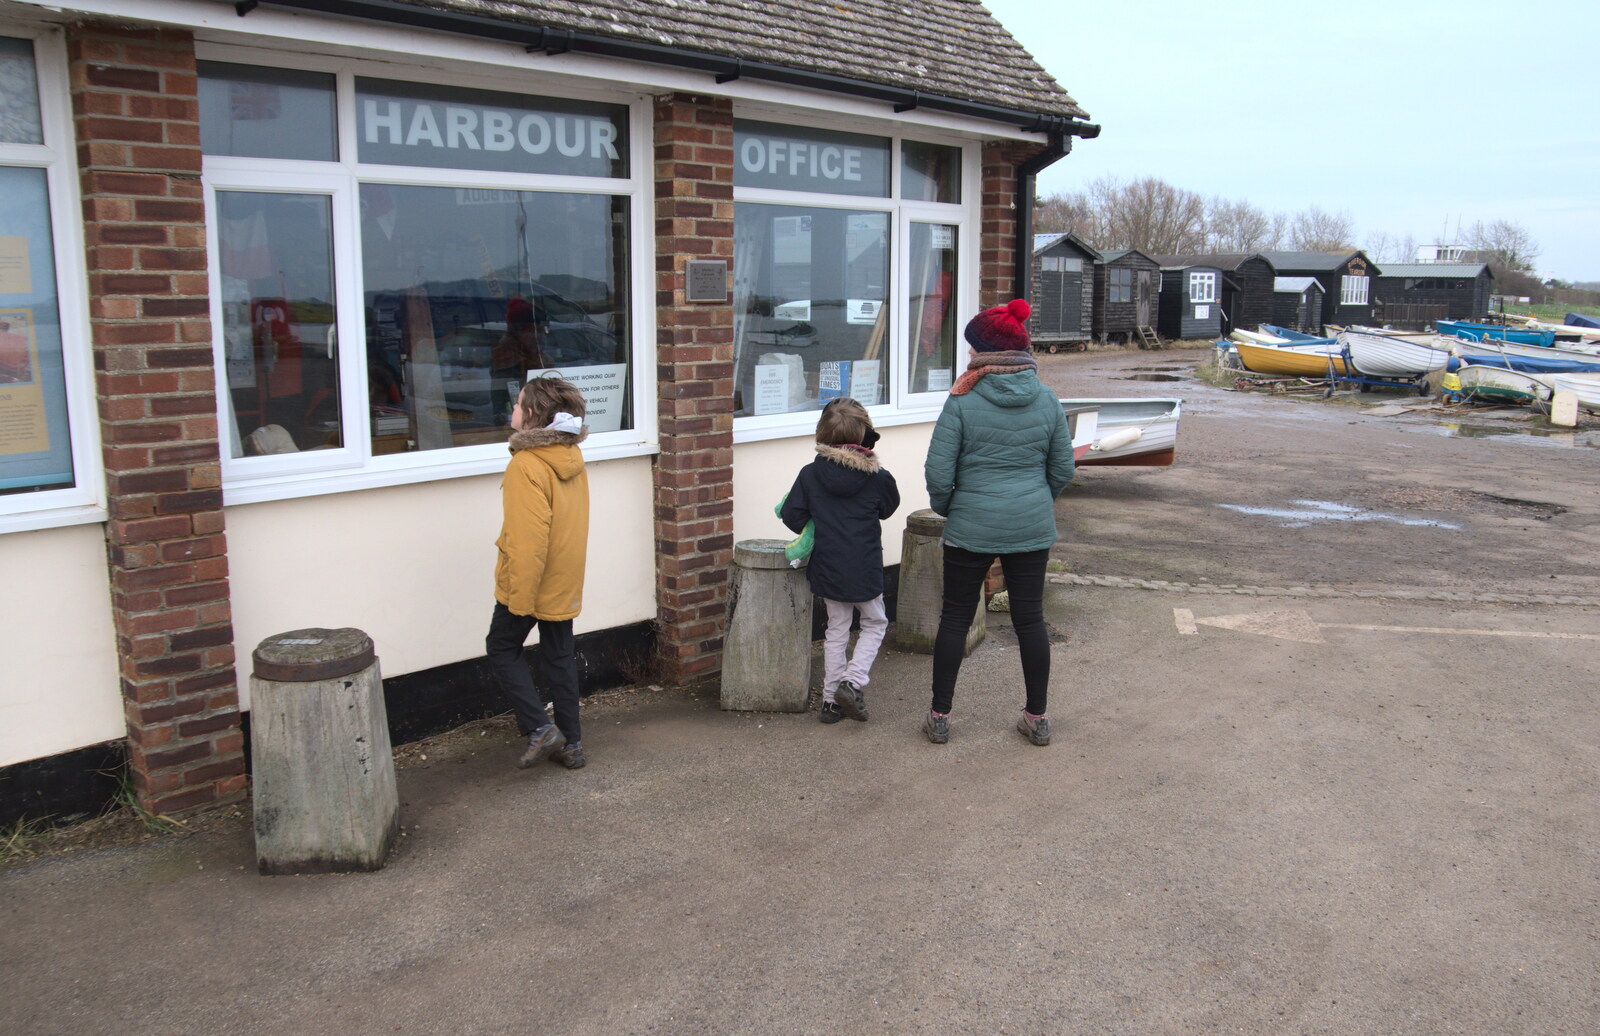 A Trip to Orford, Suffolk - 25th January 2020: We roam around by the harbour office